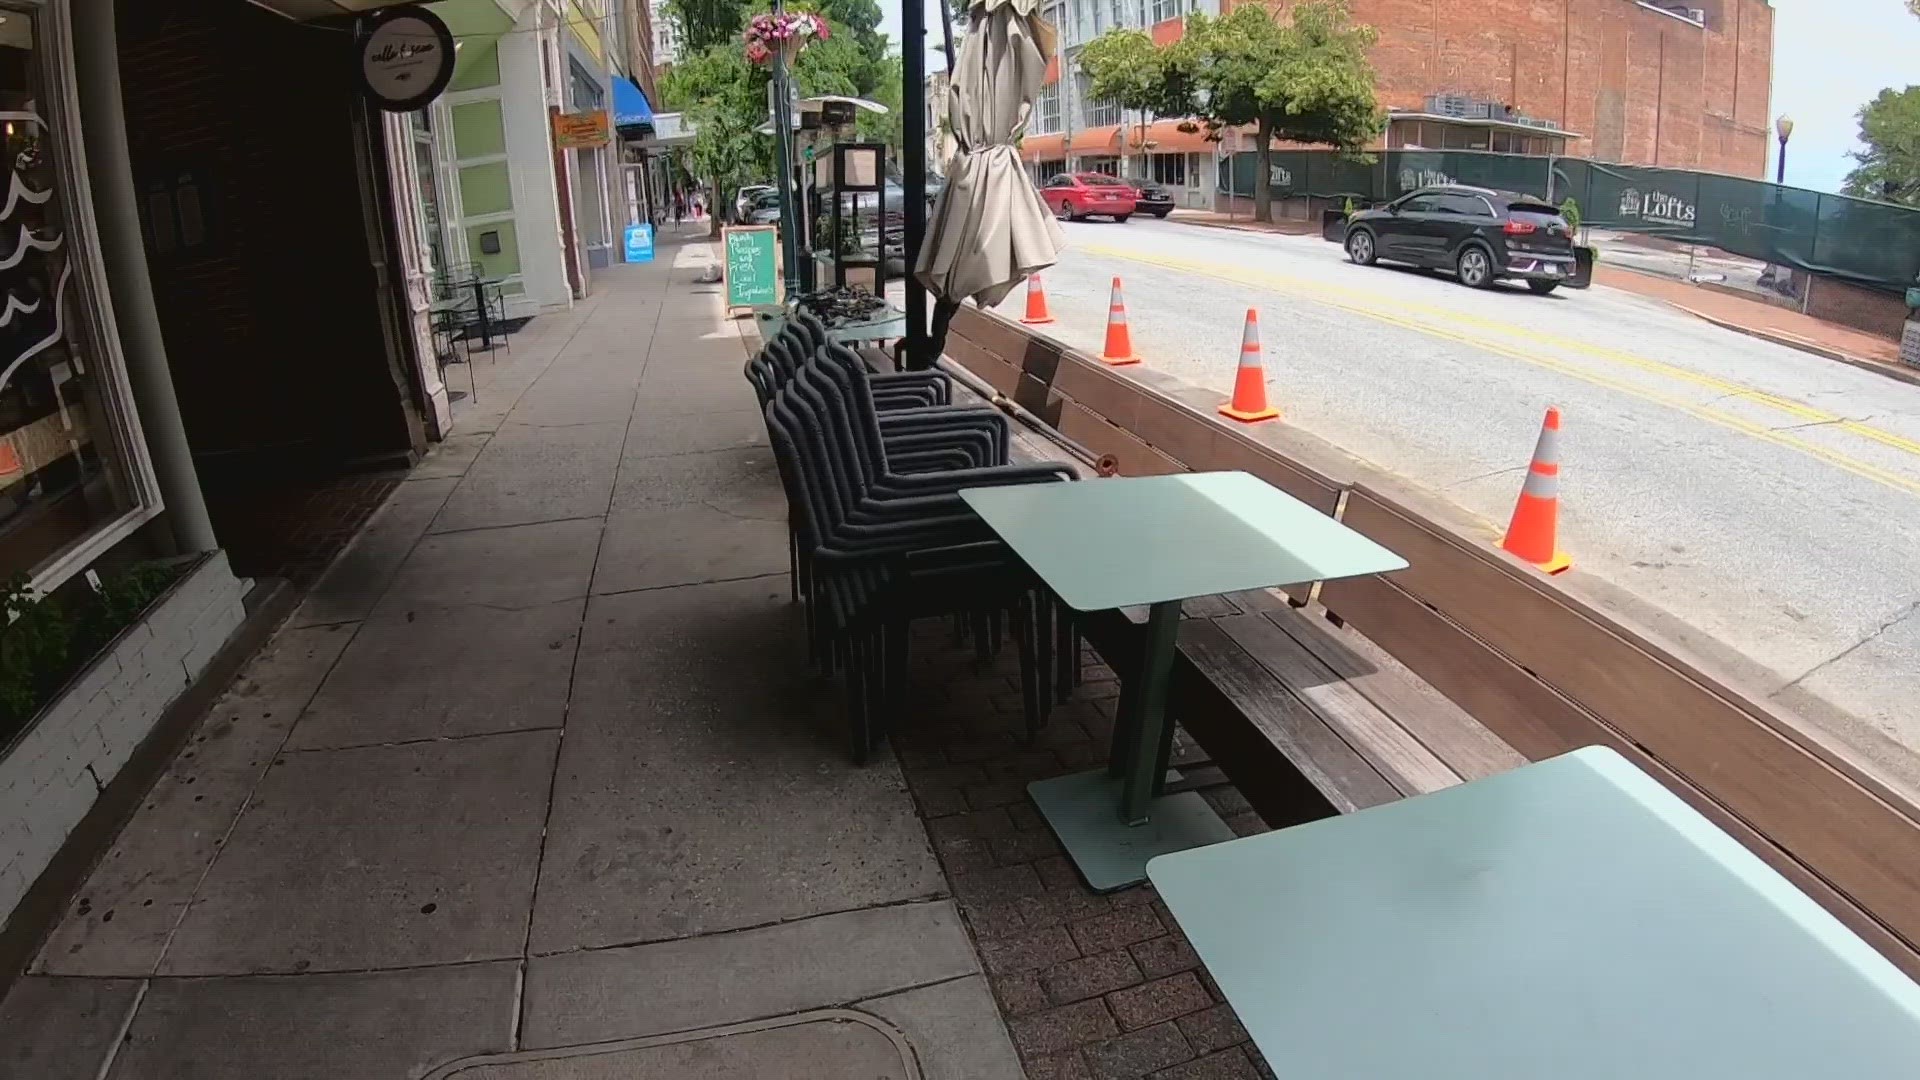 Crews are installing new permanent outdoor spaces for restaurants in Downtown Greensboro.